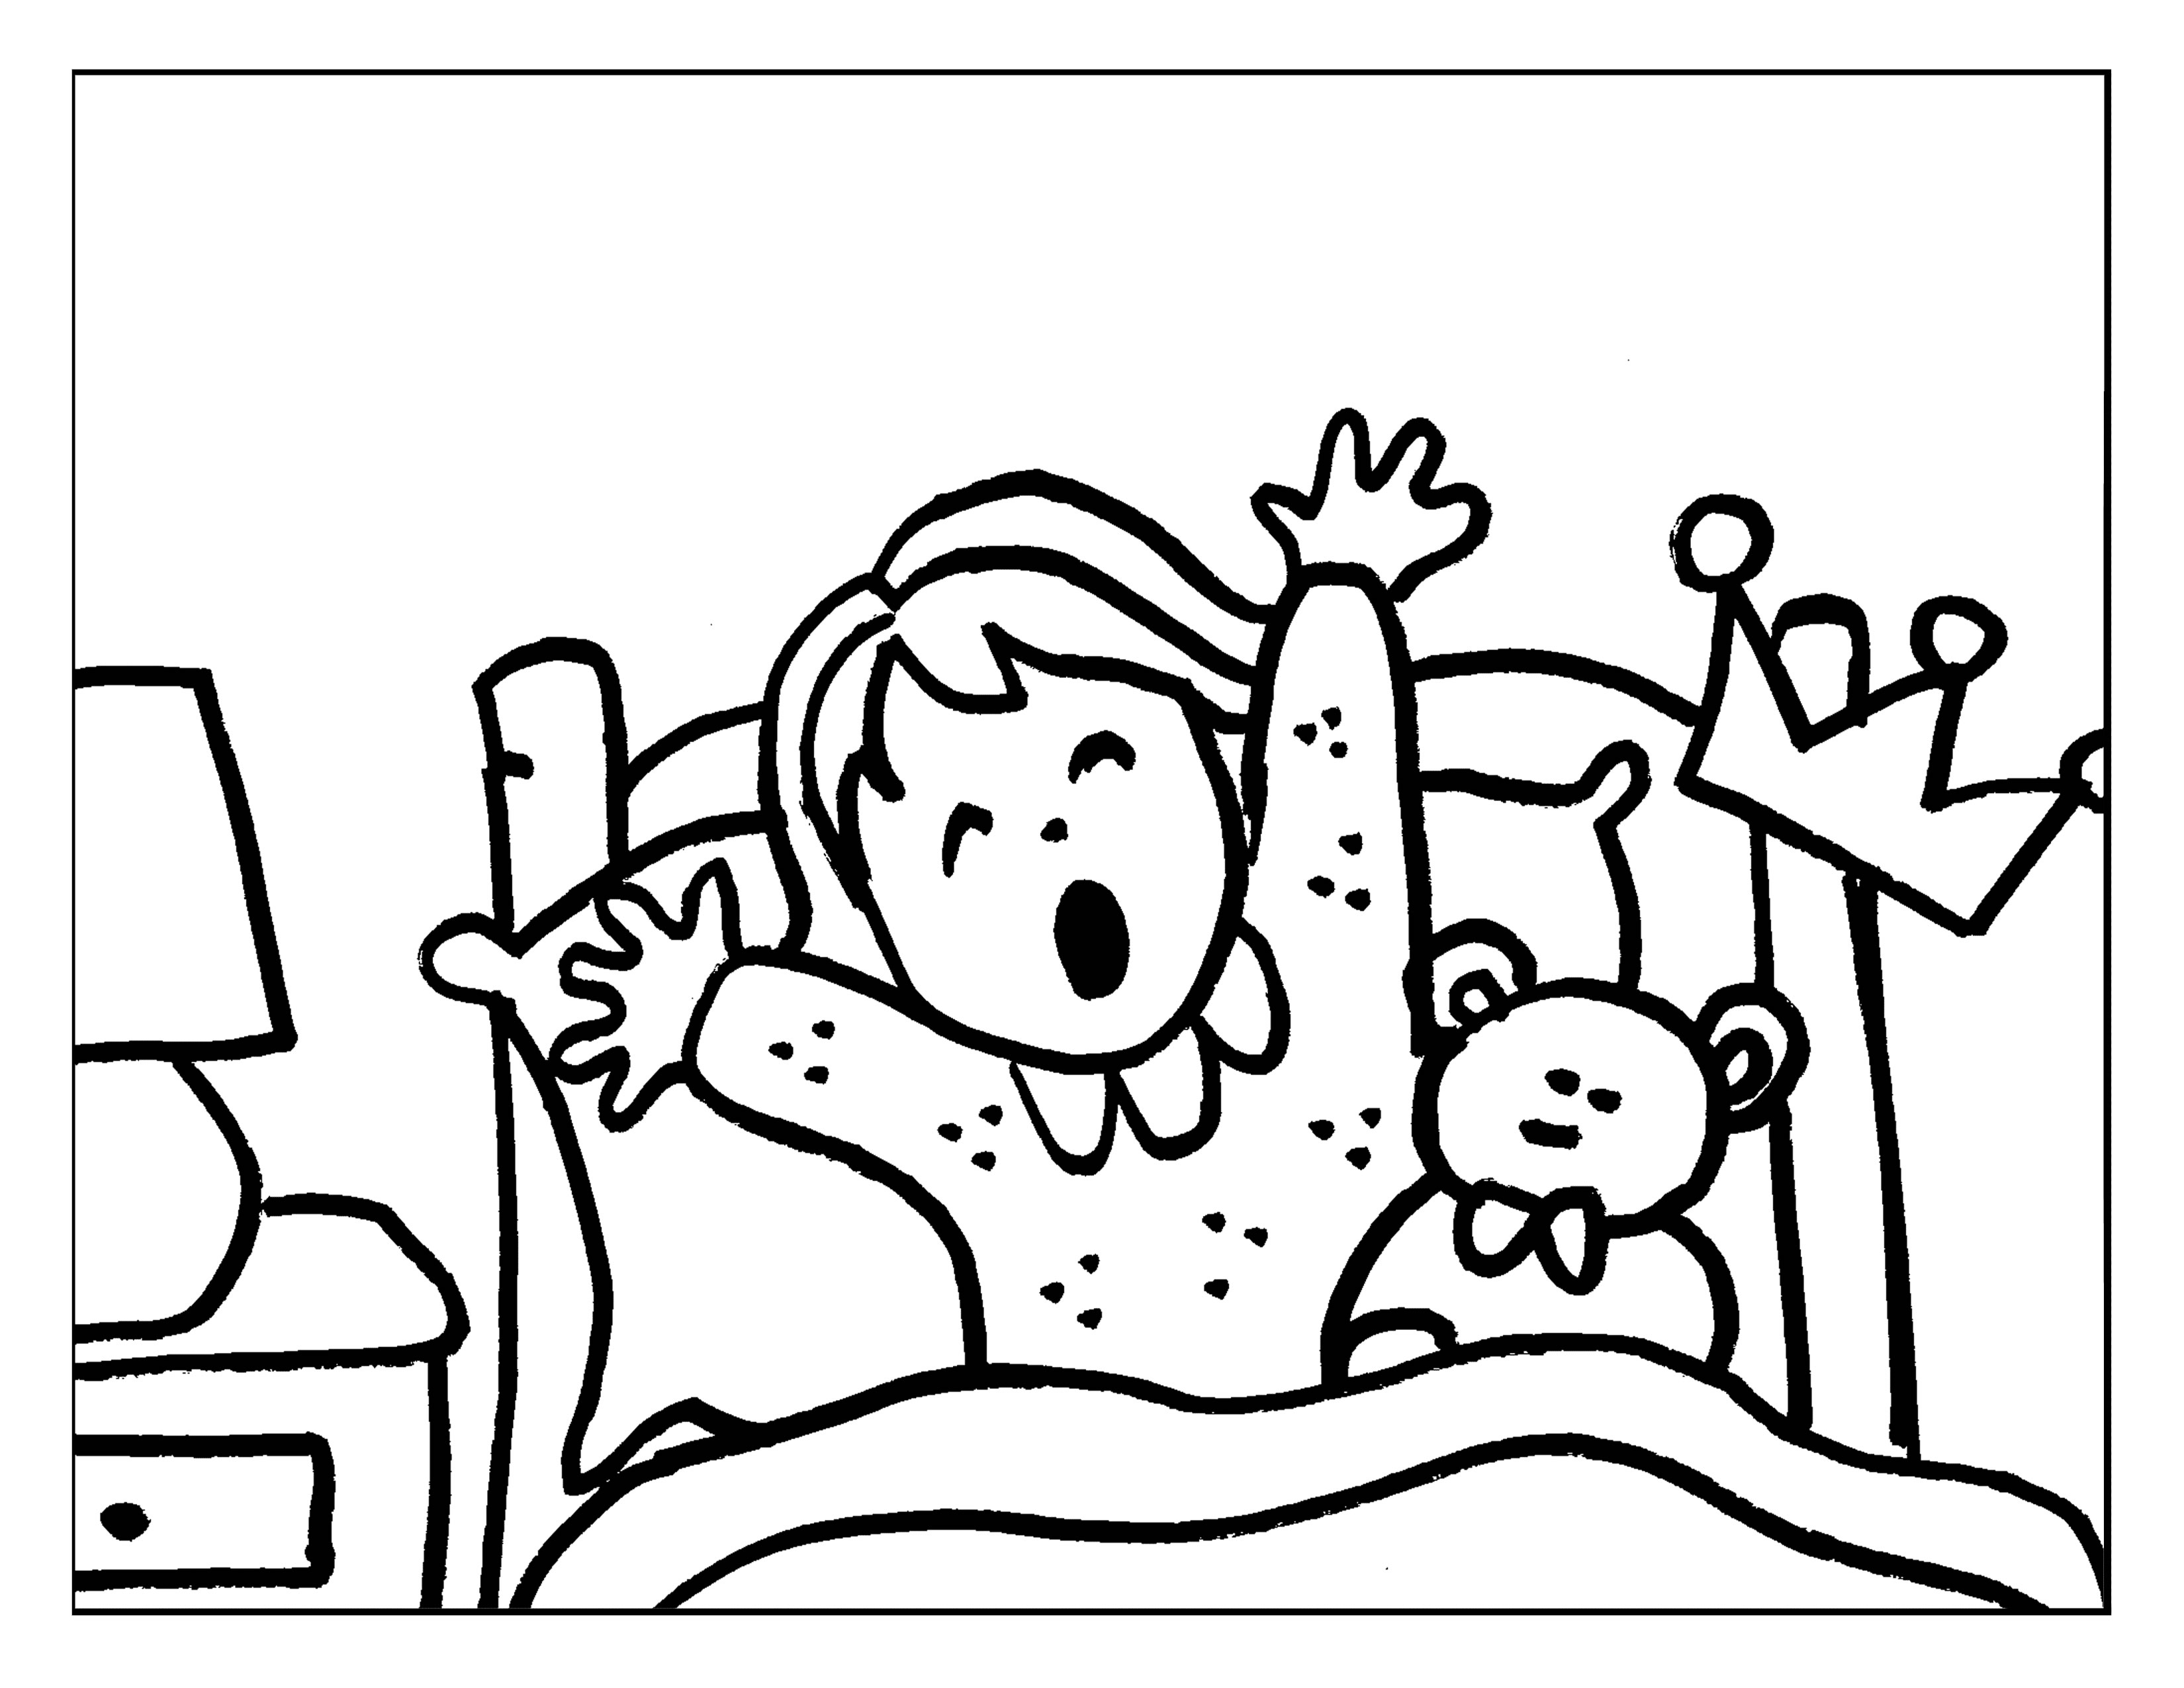 morning clipart black and white